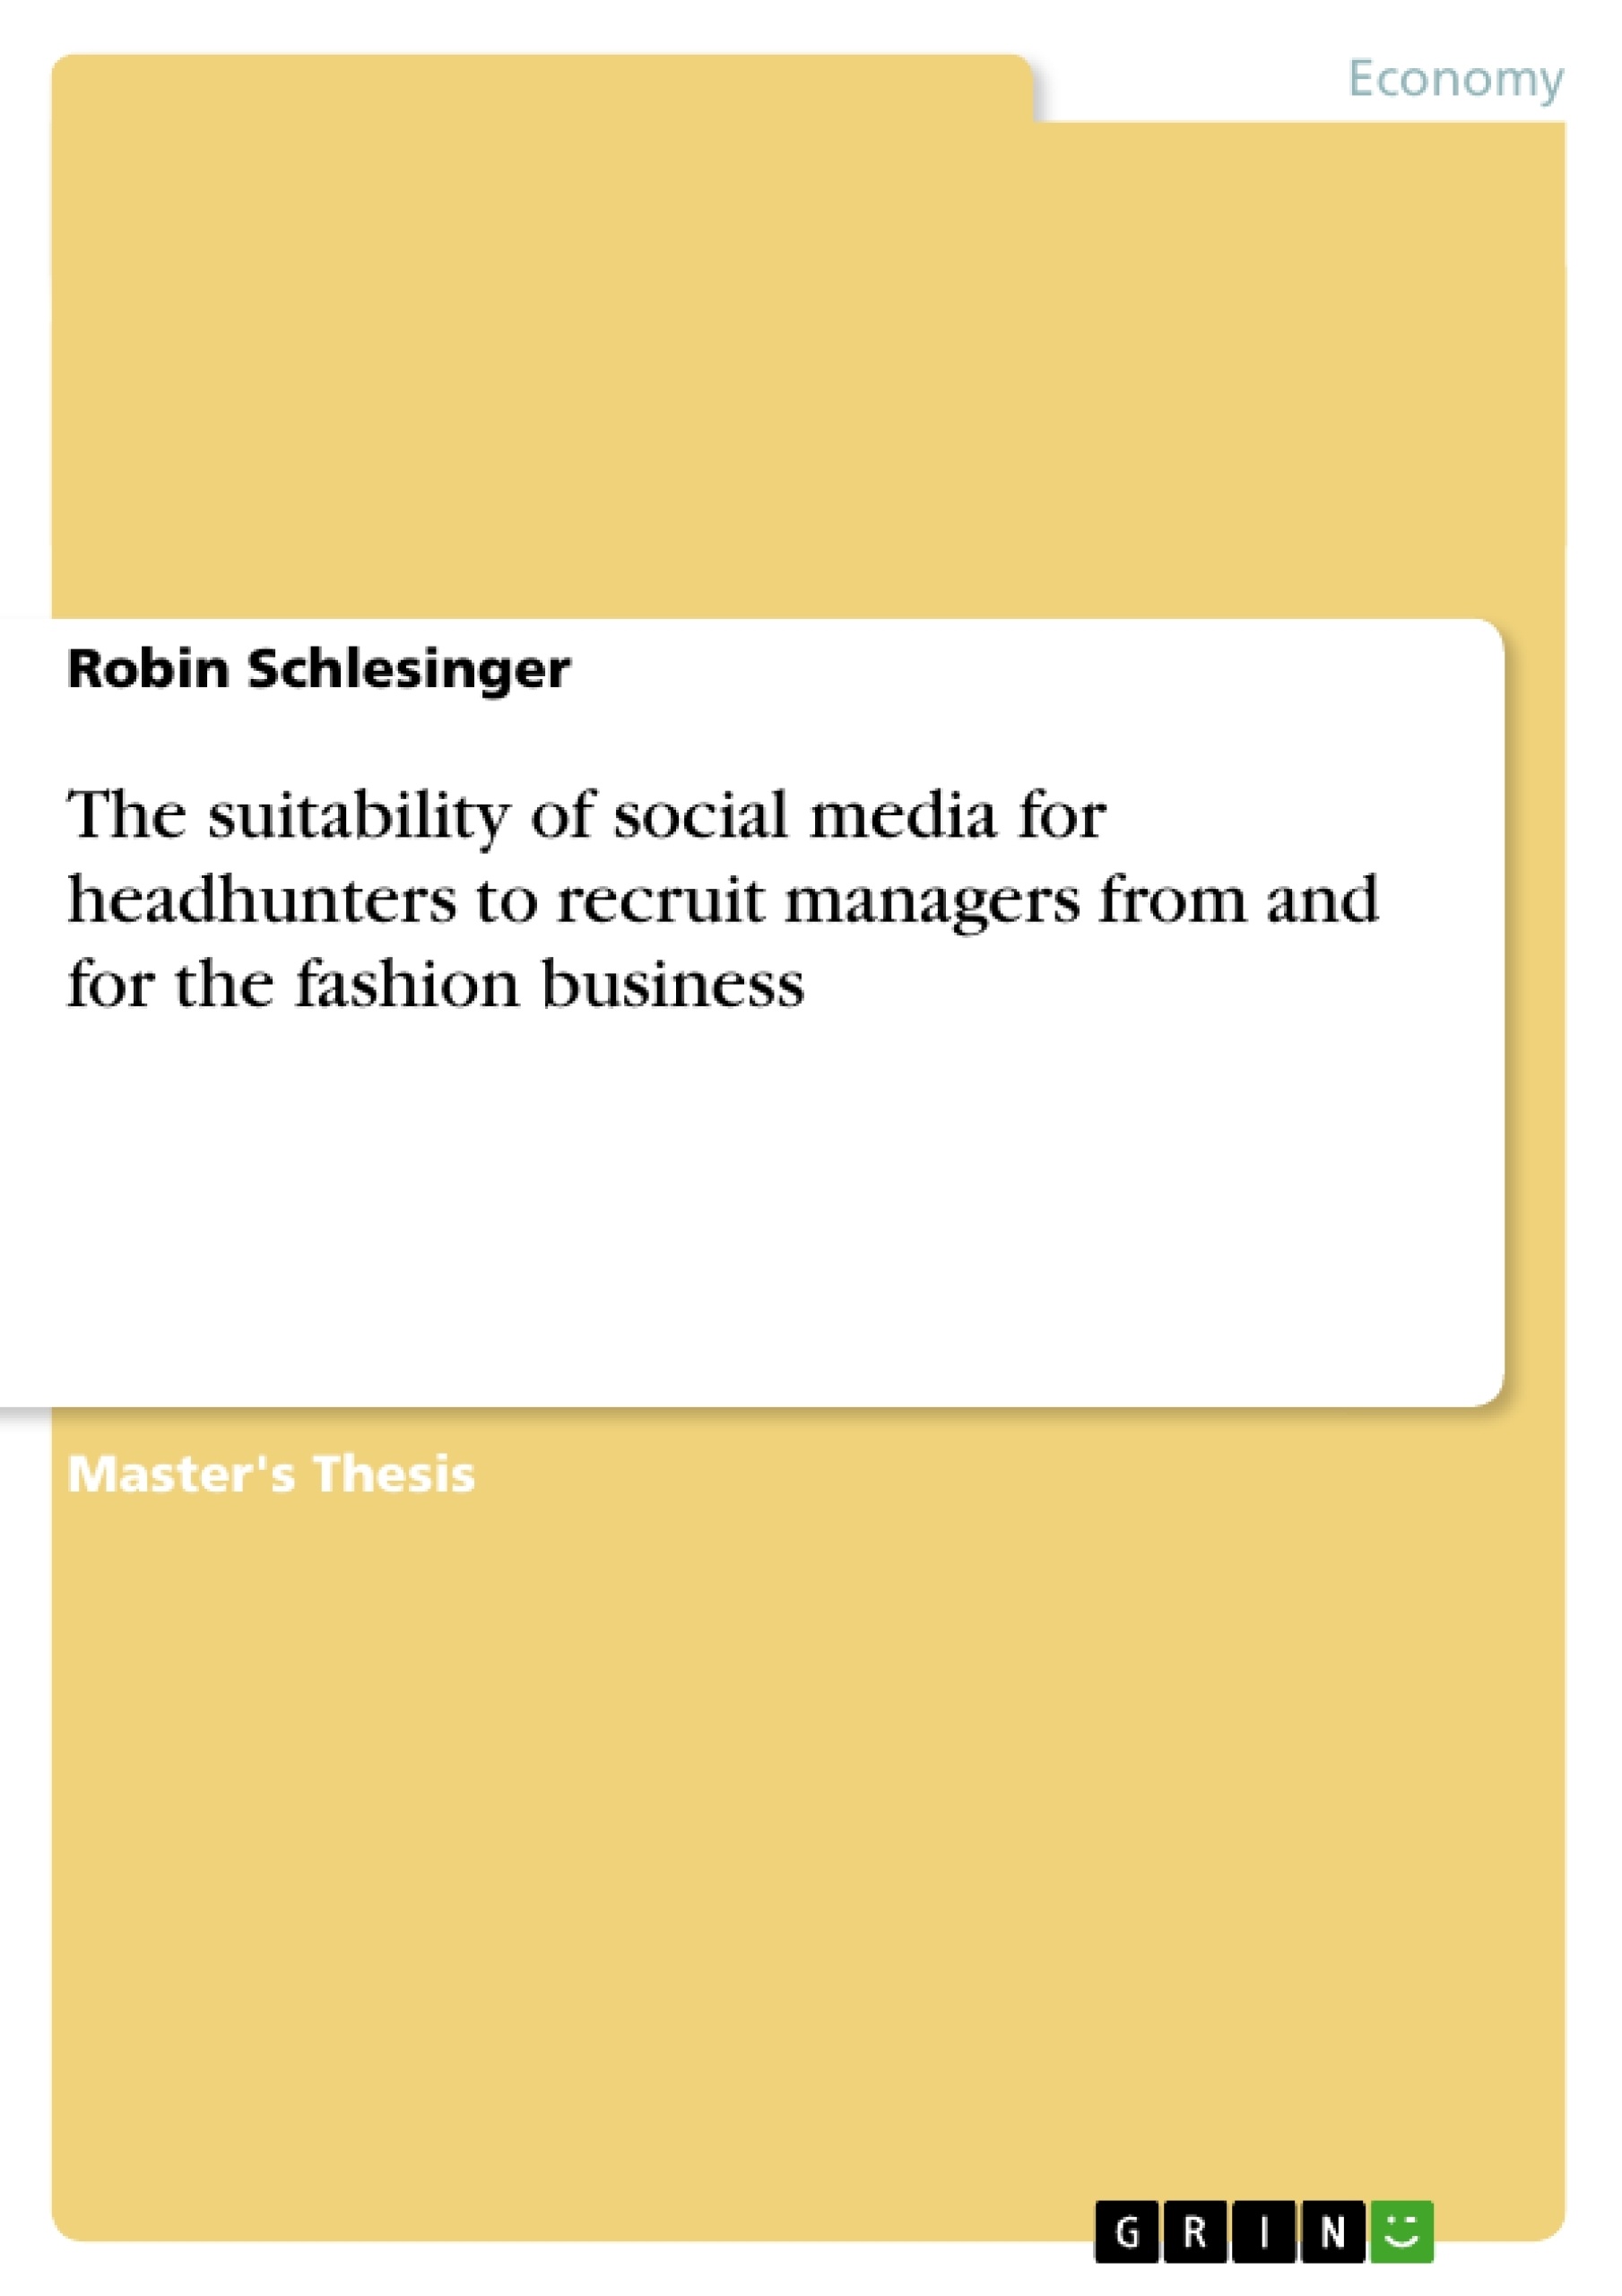 Title: The suitability of social media for headhunters to recruit managers from and for the fashion business